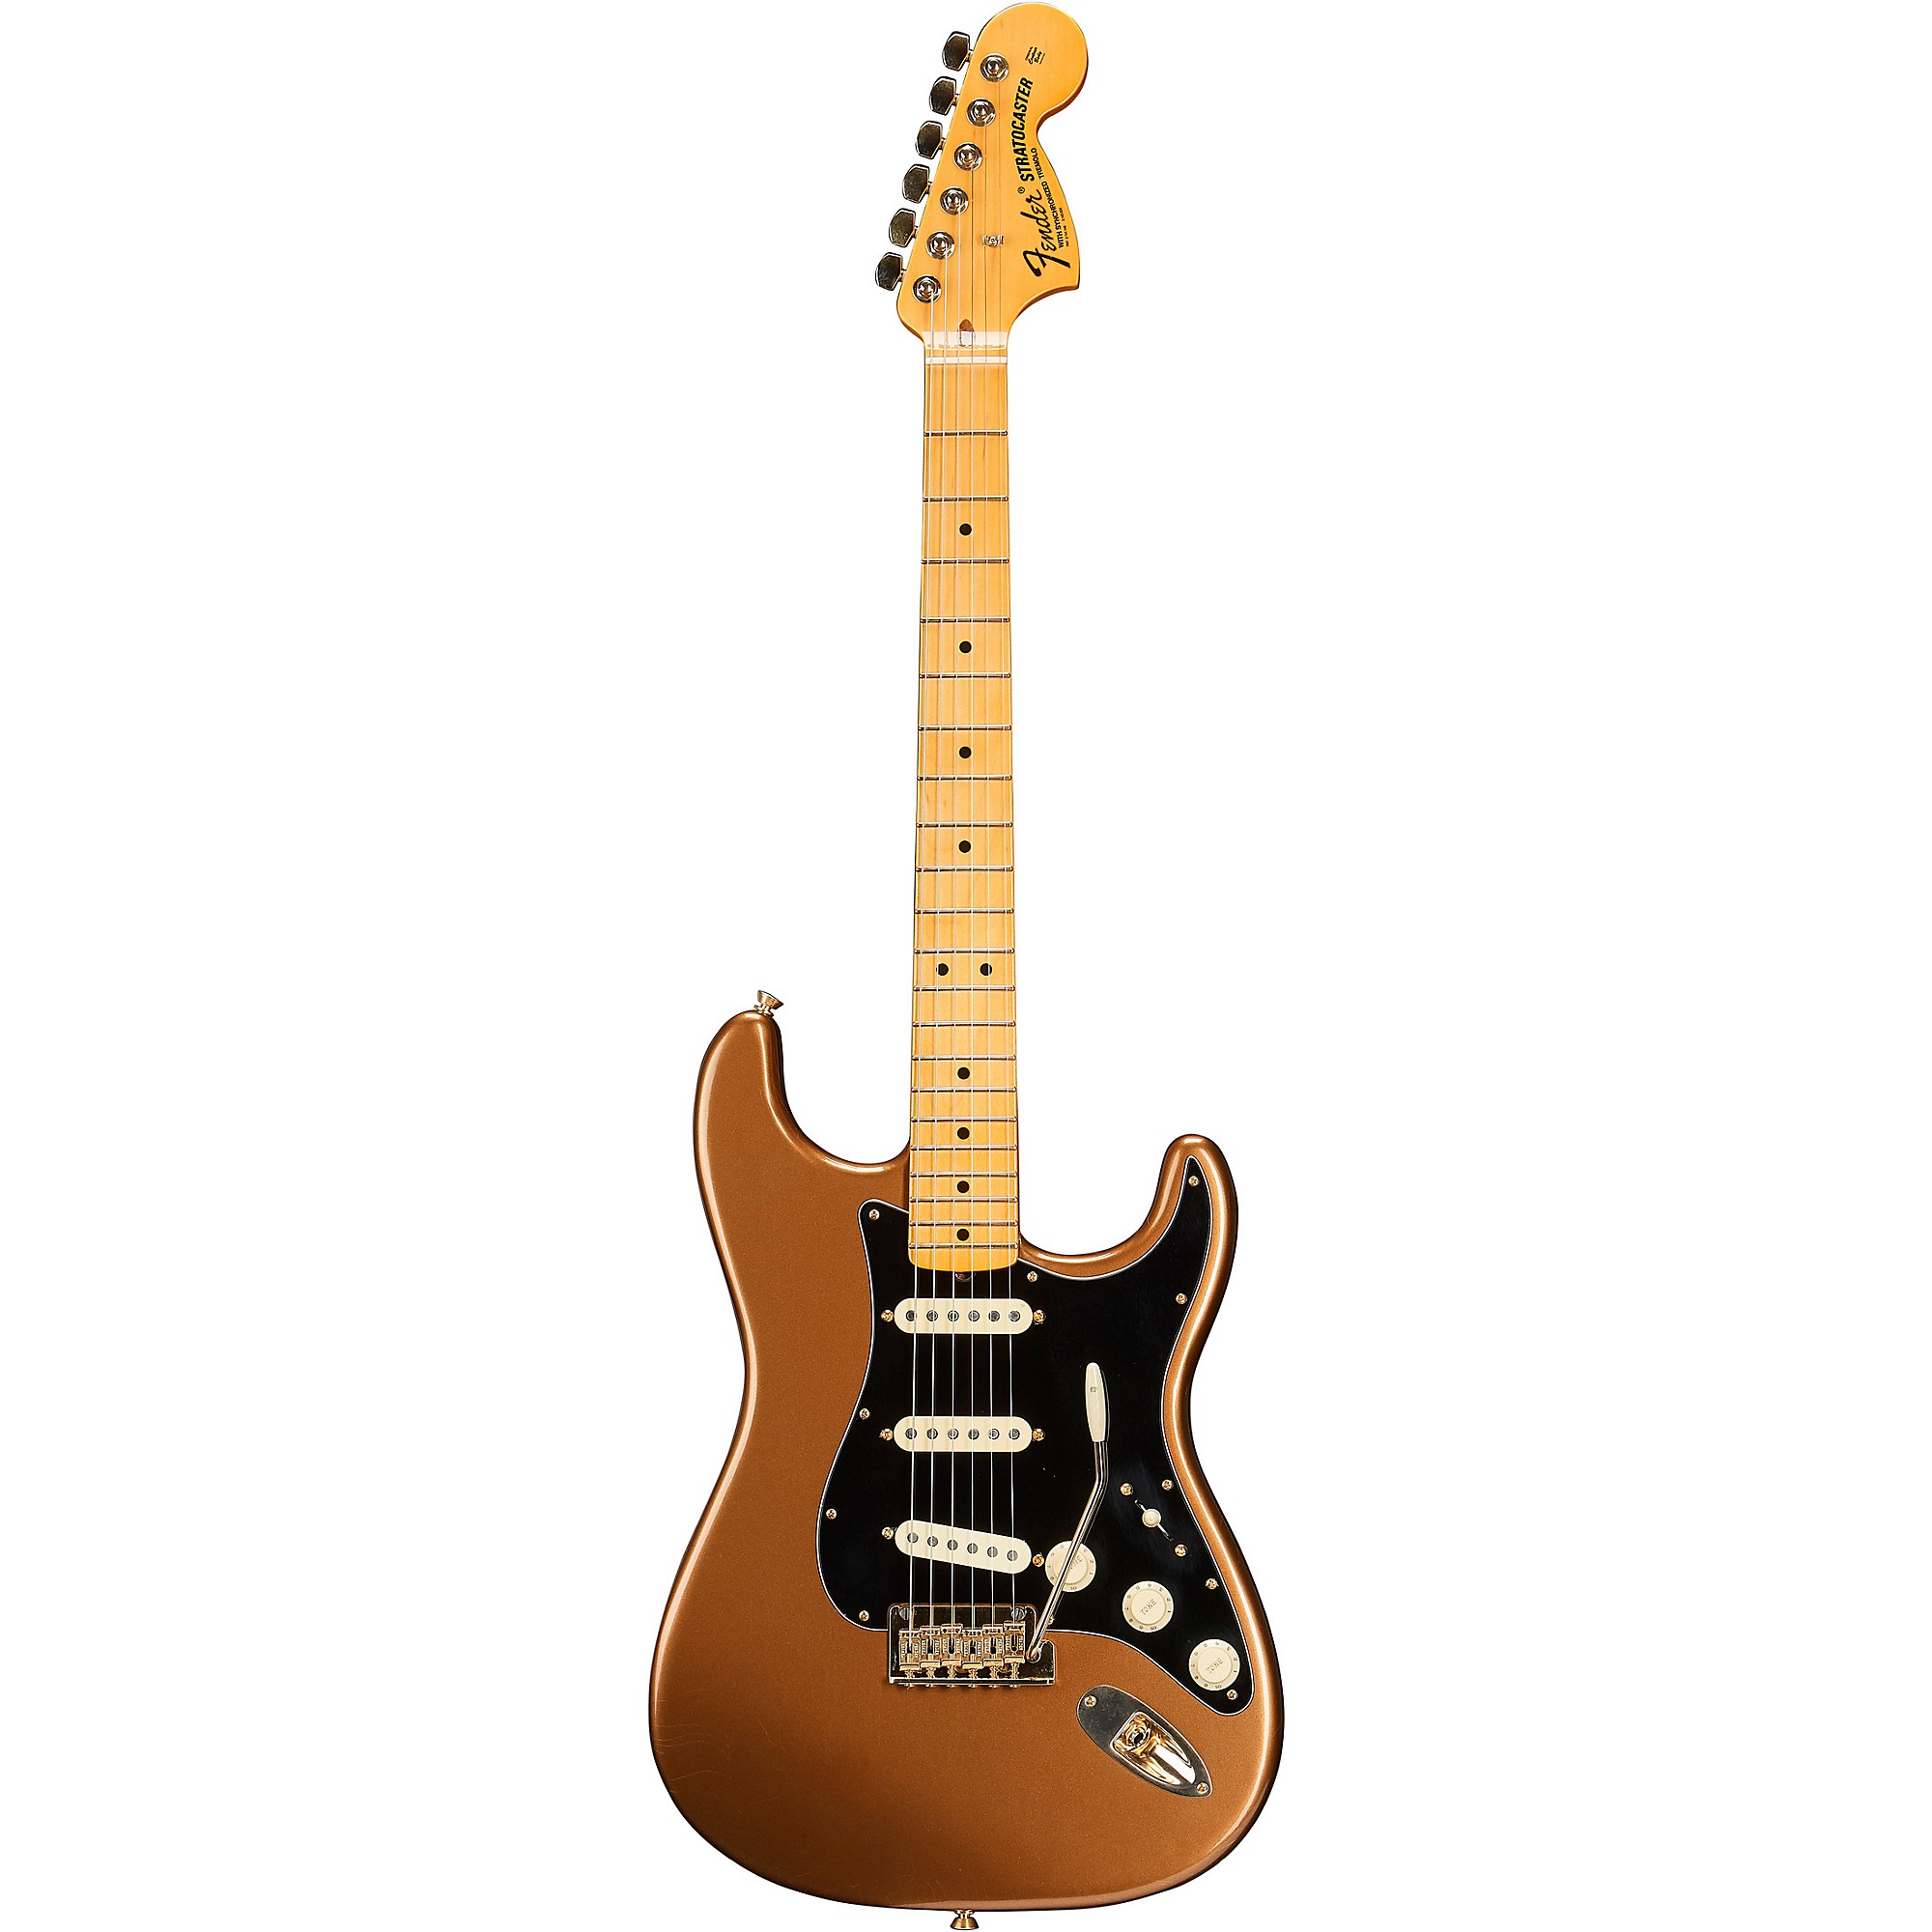 электрогитара fender limited edition bruno mars stratocaster electric guitar mars mocha Электрогитара Fender Bruno Mars Stratocaster Mars Mocha